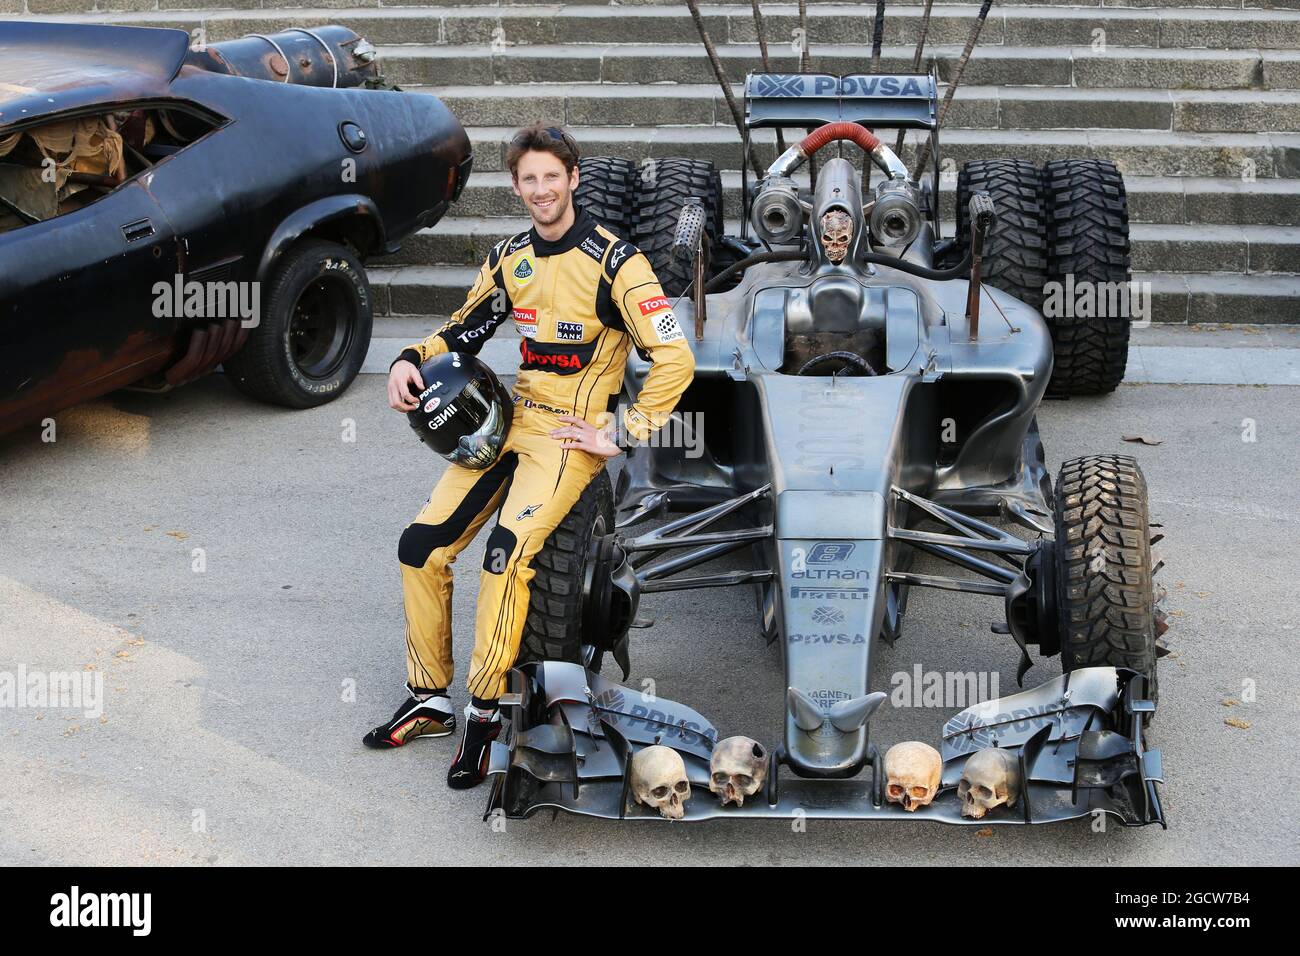 Romain Grosjean (FRA) Lotus F1 Team with special race overalls and car livery to promote the film Mad Max: Fury Road. Spanish Grand Prix, Friday 8th May 2015. Barcelona, Spain. Stock Photo